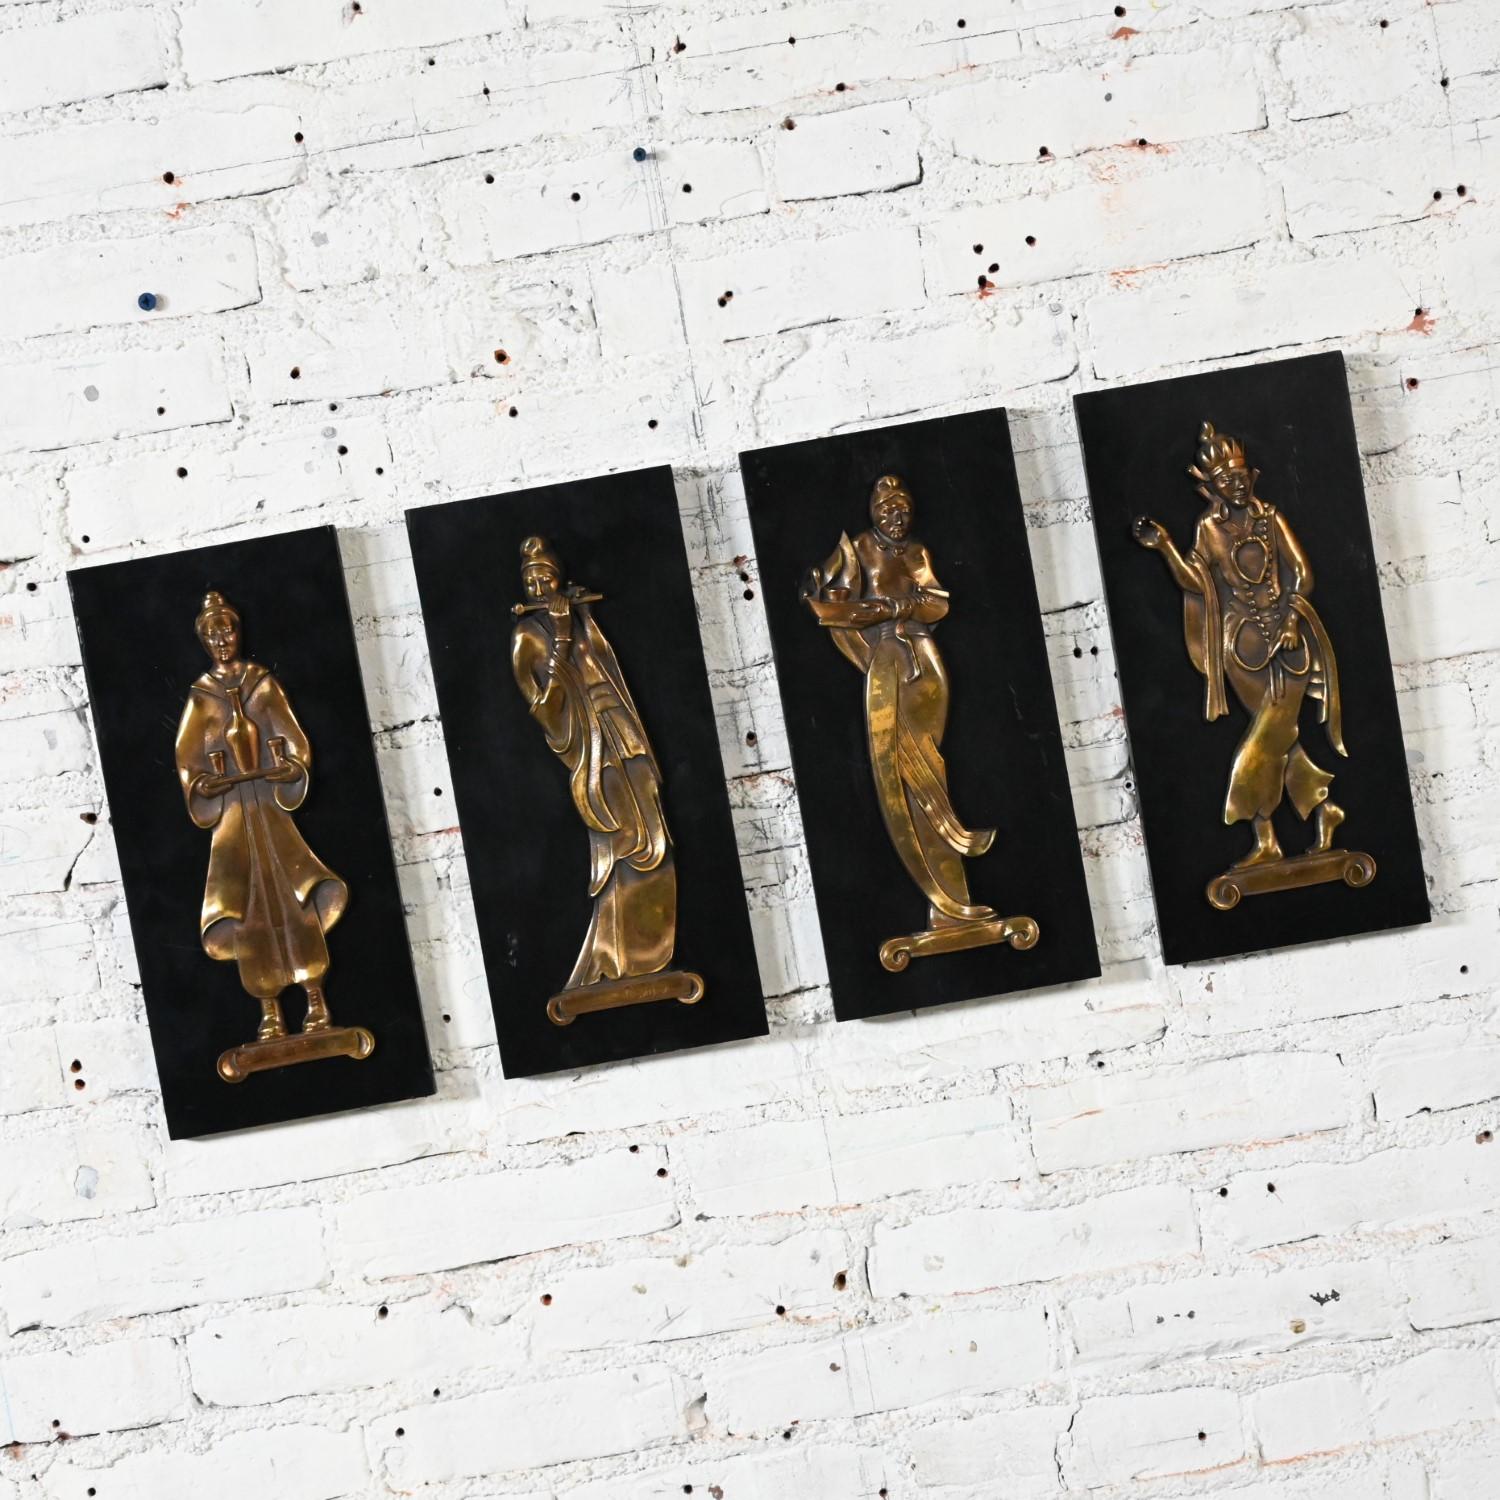 Marvelous vintage Asian plaques of cast bronze figures mounted on black painted plywood backgrounds signed Gansu, set of 4. Beautiful condition, keeping in mind that these are vintage and not new so will have signs of use and wear even if it has